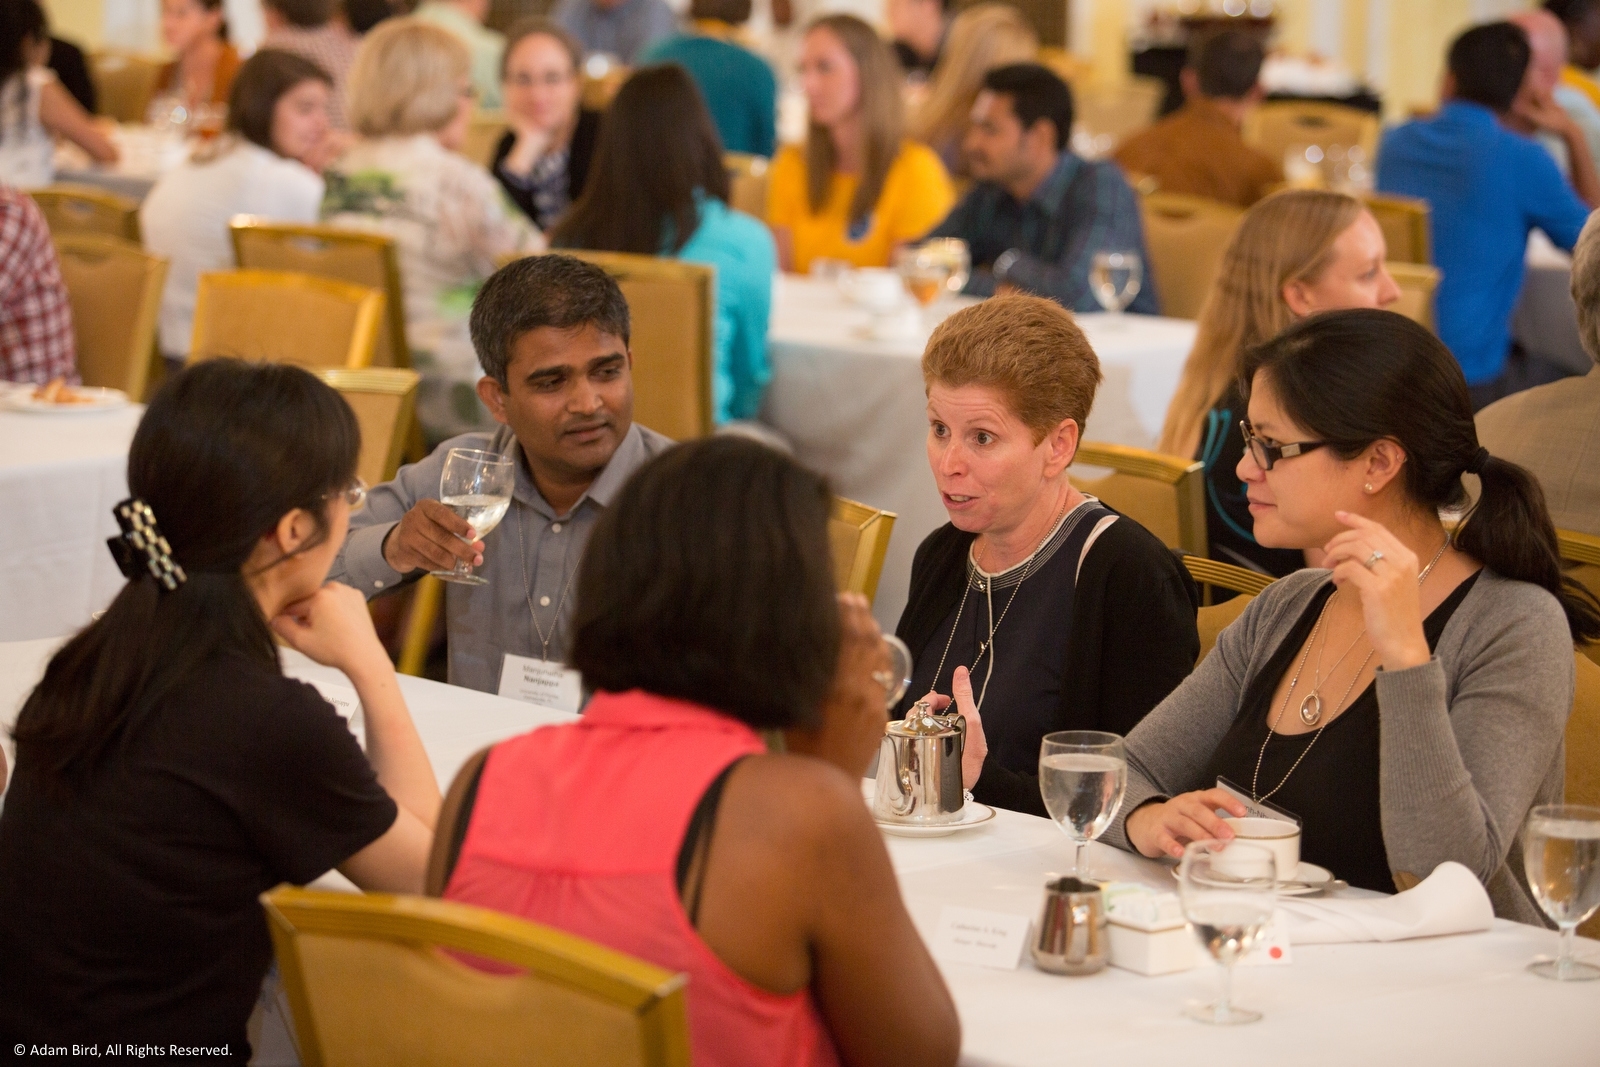 Dr. Jodi Anne Flaws (center) connects with trainees in a conversational setting at the 2014 Trainee-Mentor Luncheon. SSR is dedicated to the development of reproductive biologists in training.